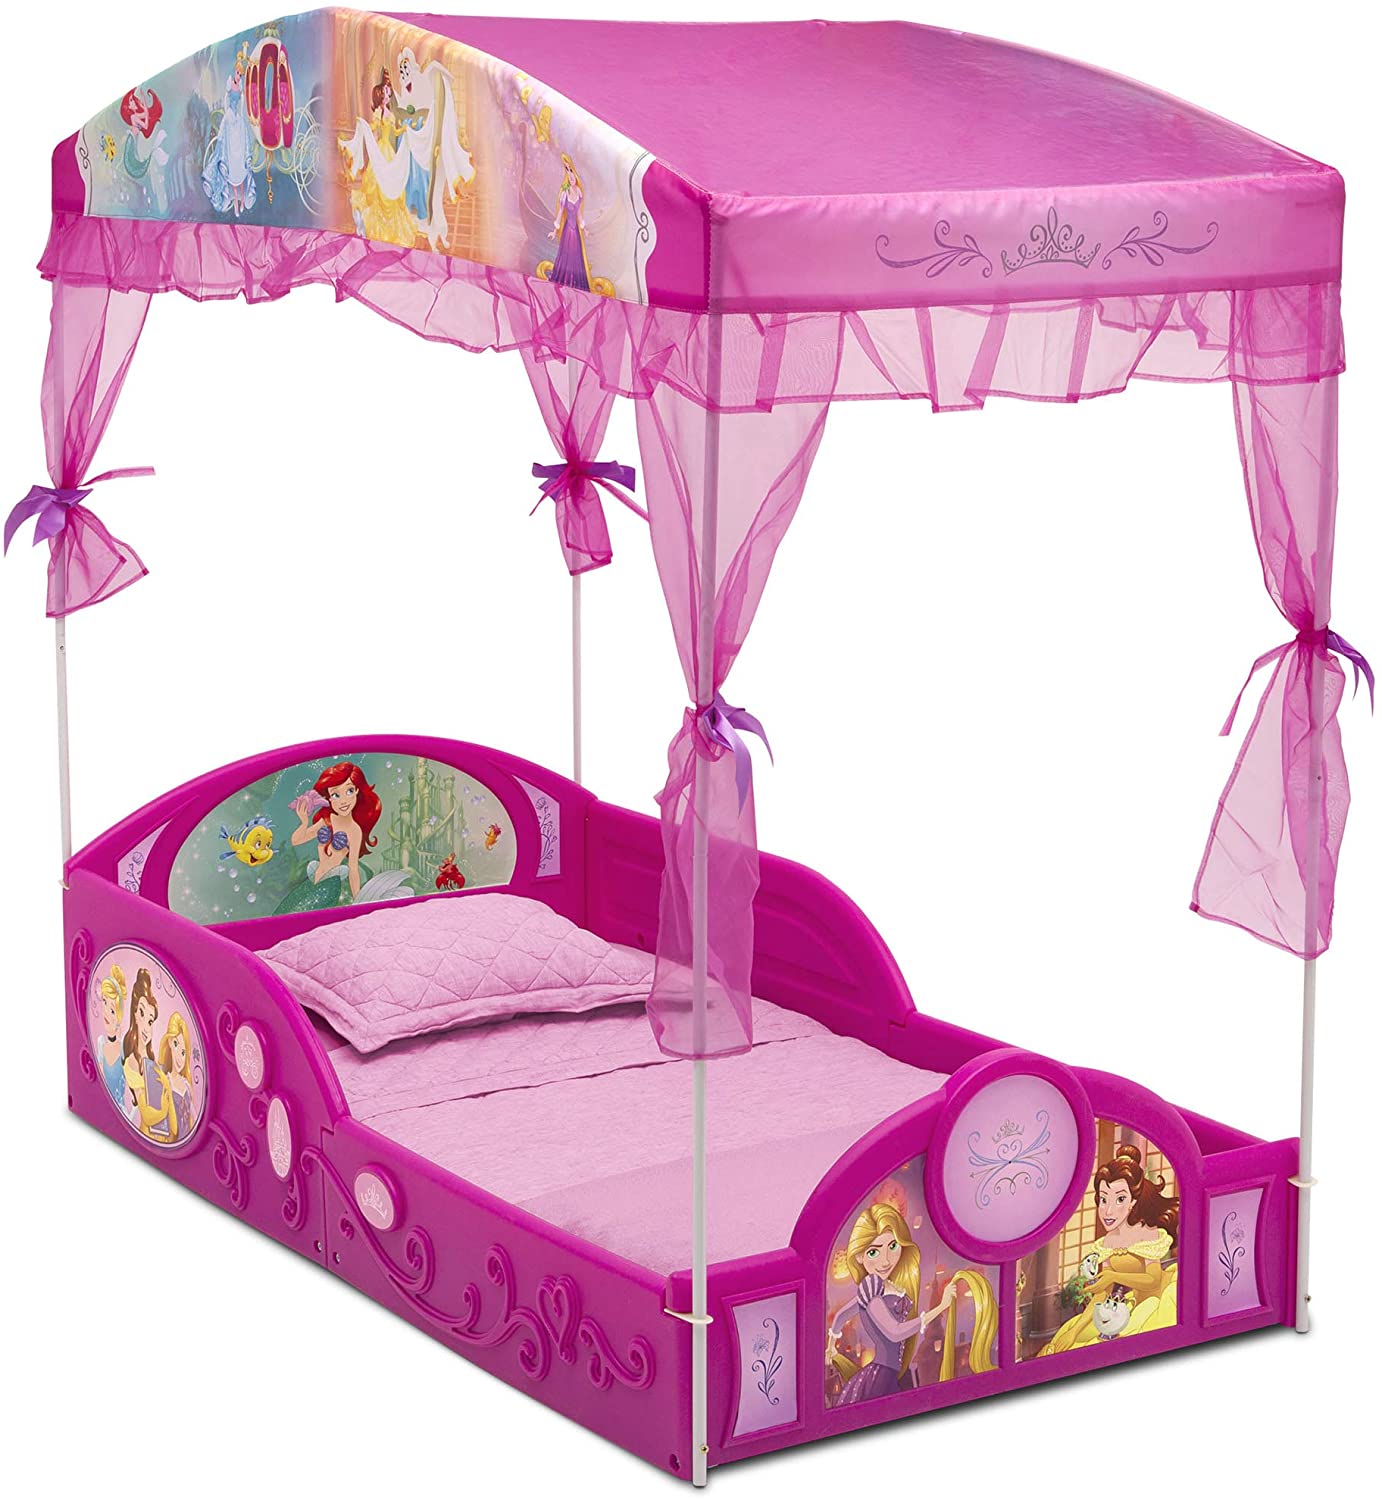 Delta Children Disney Princess Plastic Sleep and Play Toddler Bed with Canopy